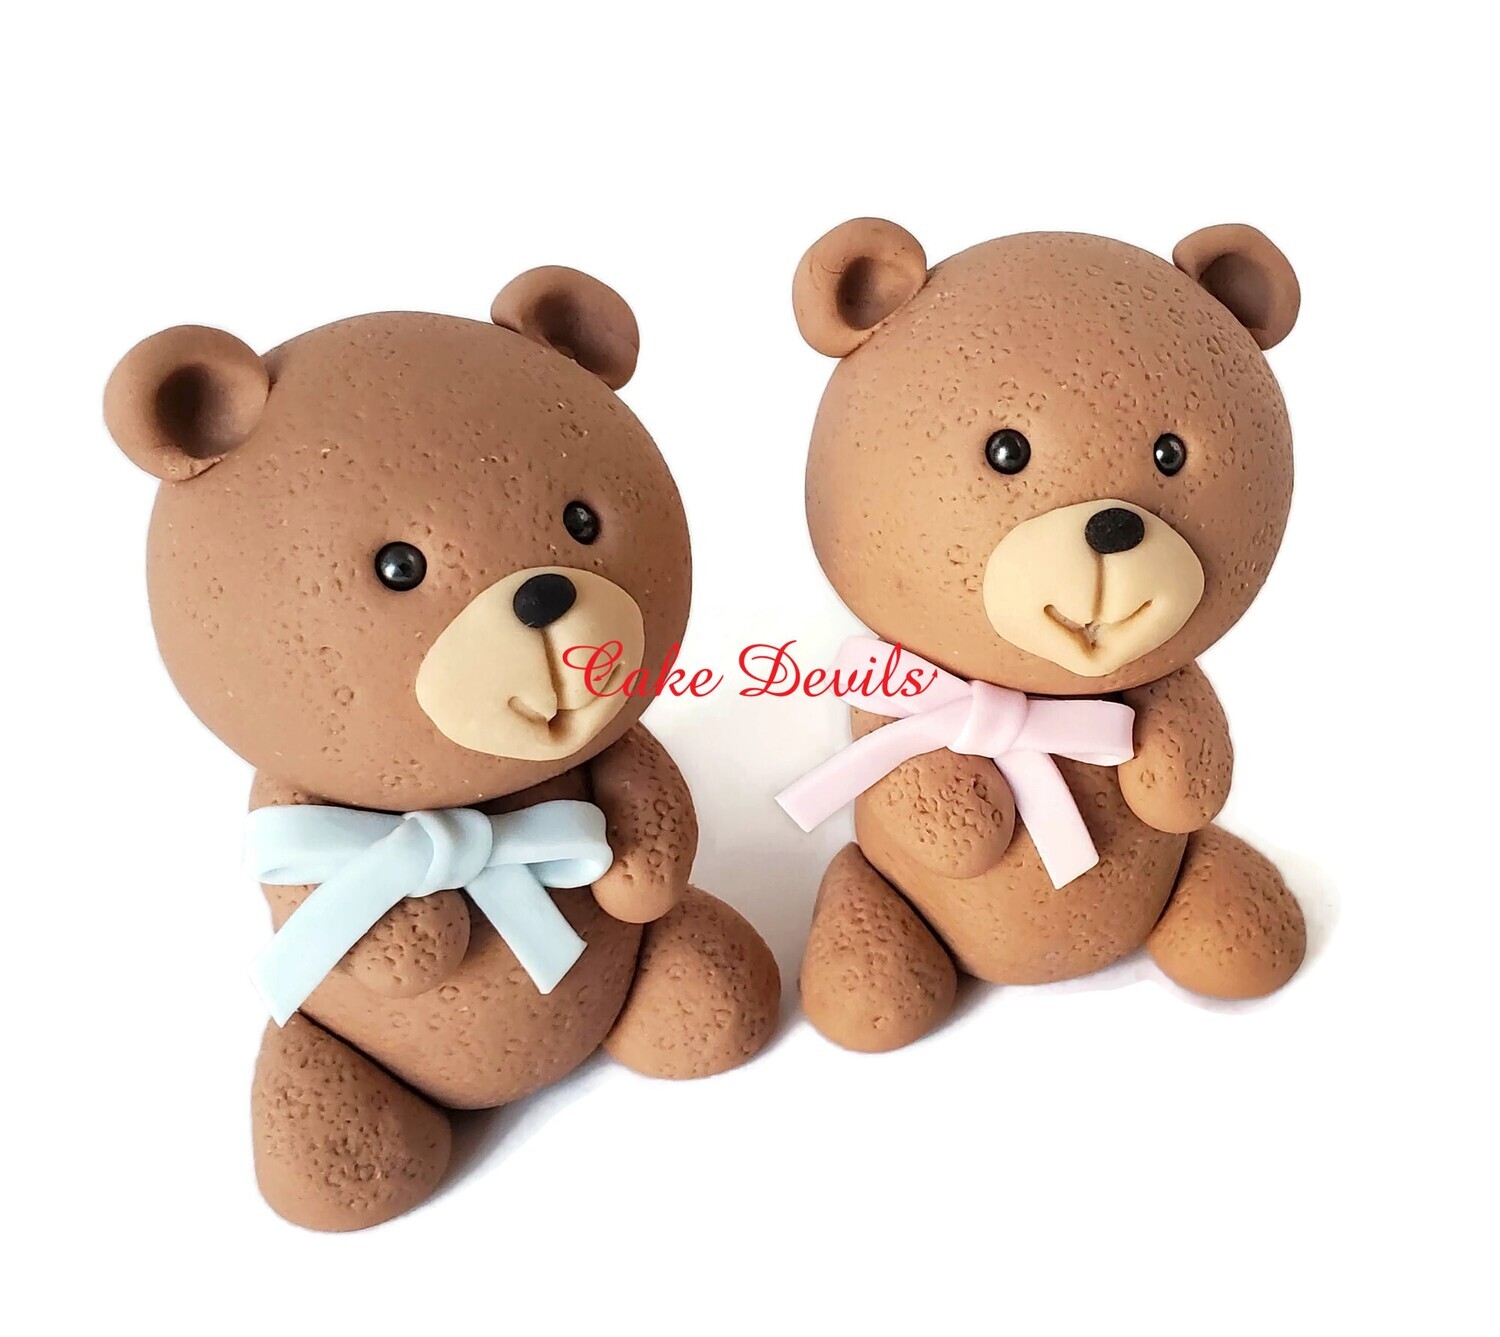 Fondant Gender Reveal Teddy Bear Cake Toppers, Also great for Baby Shower, Birthday and more!